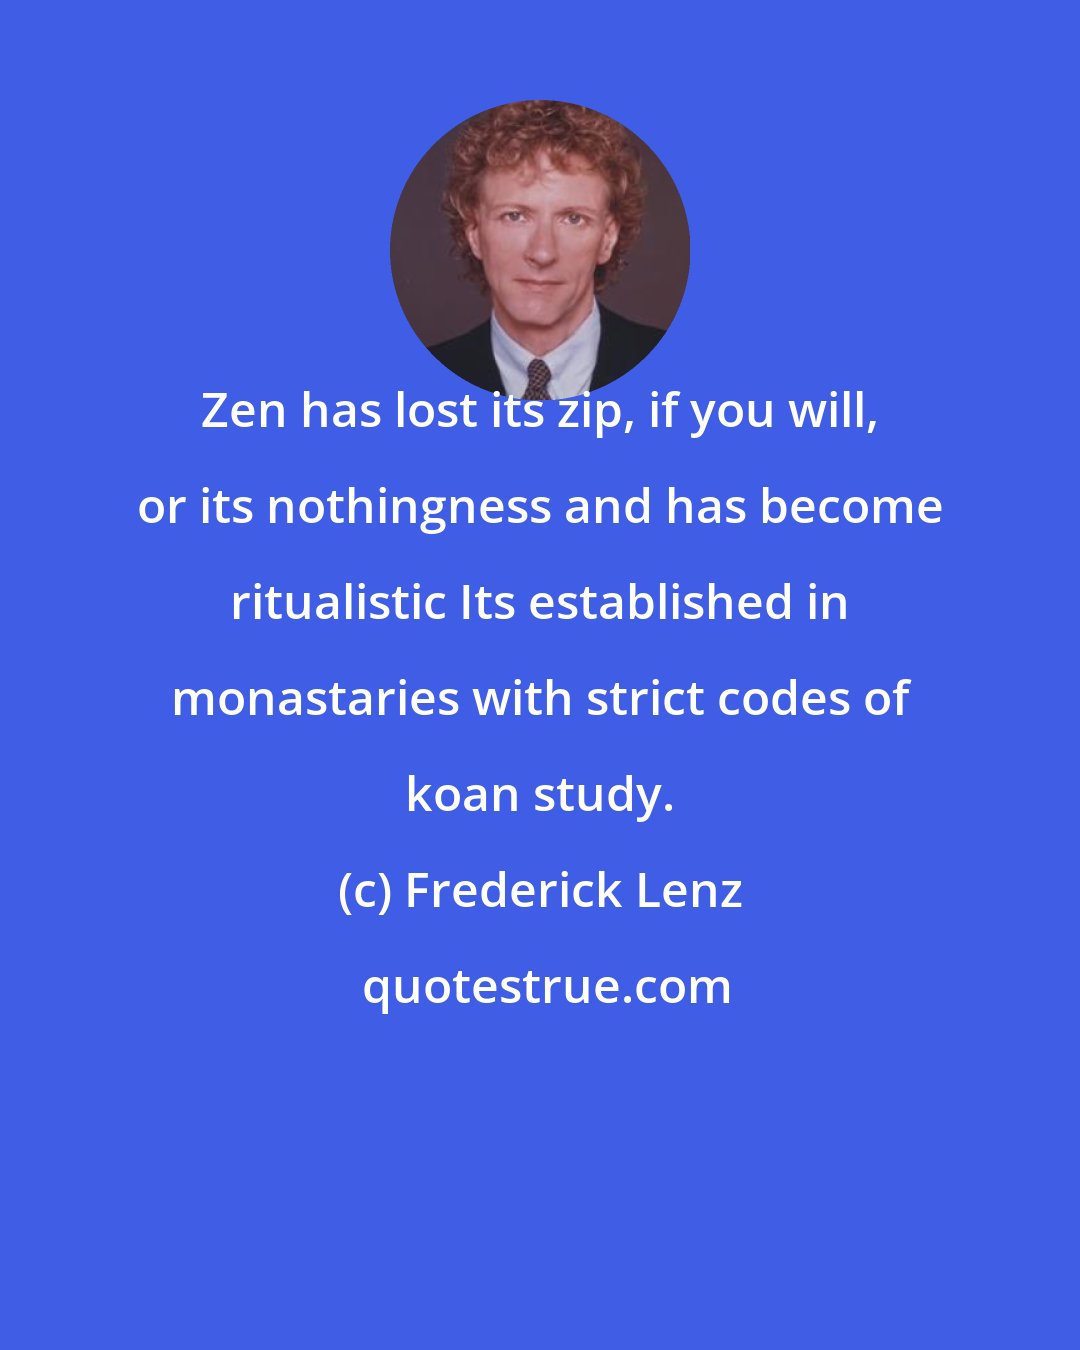 Frederick Lenz: Zen has lost its zip, if you will, or its nothingness and has become ritualistic Its established in monastaries with strict codes of koan study.